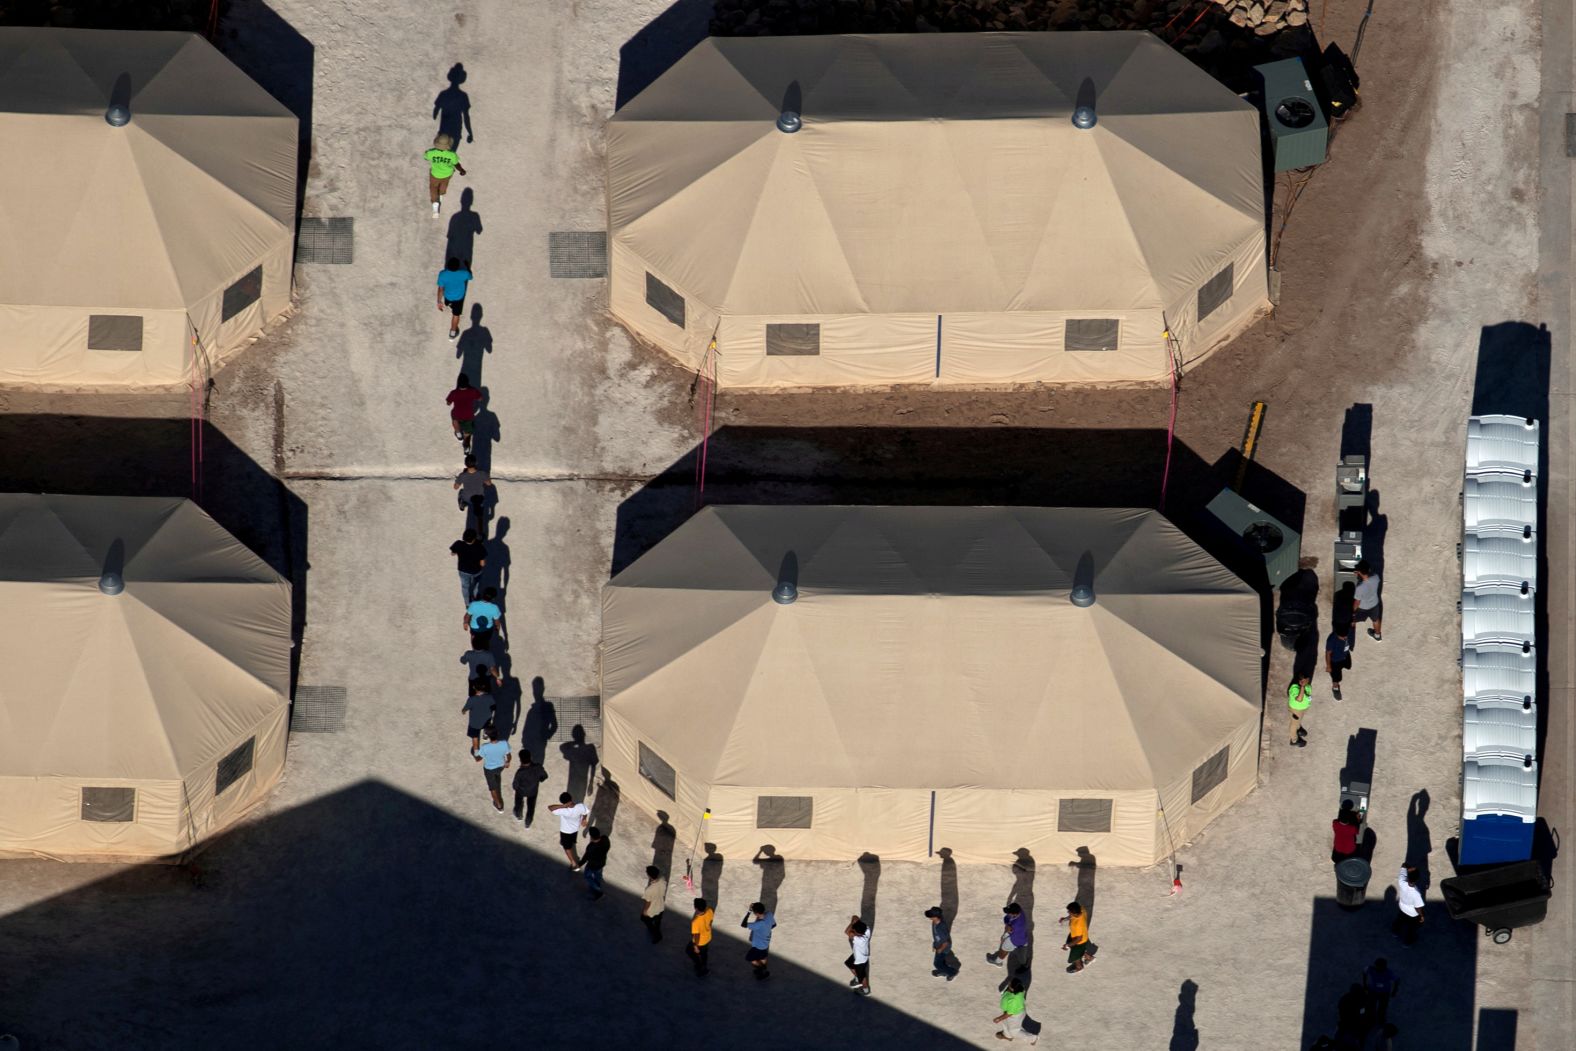 Immigrant children who had been separated from their families walk between tents at a temporary shelter in Tornillo, Texas, in June 2018. Two days later, after facing intense pressure from across the political spectrum, US President Donald Trump <a href="https://www.cnn.com/2018/06/20/politics/trump-separation-action-immigration/index.html" target="_blank">signed an executive order</a> to stop families from being separated at the border. <a href="https://www.cnn.com/2018/06/20/politics/unaccompanied-children-centers/index.html" target="_blank">Related story: A look inside the places where child migrants are held </a>